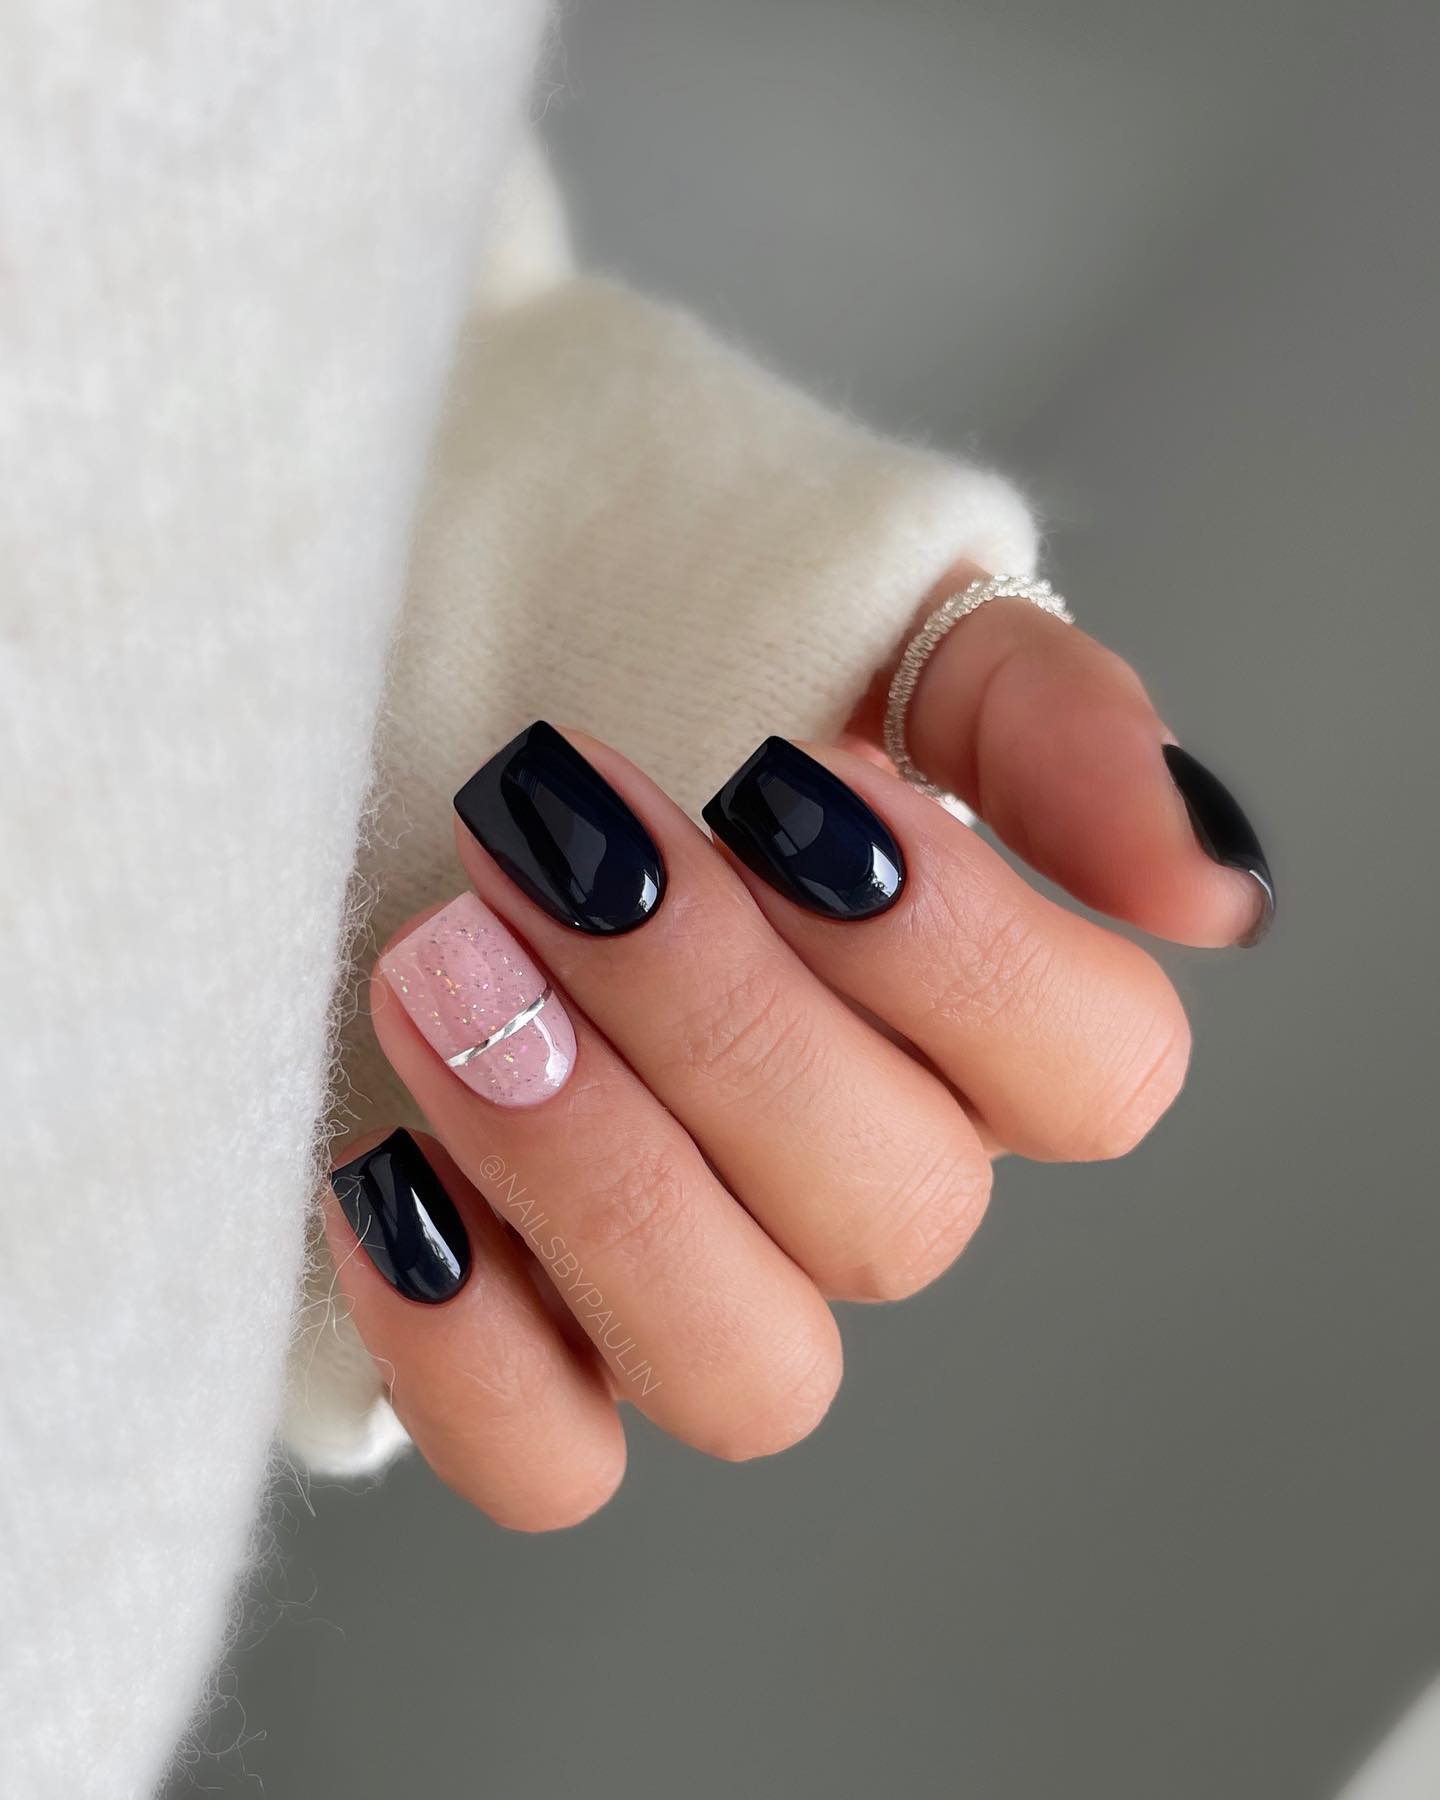 Edgy Black Nail Designs to Try This Christmas